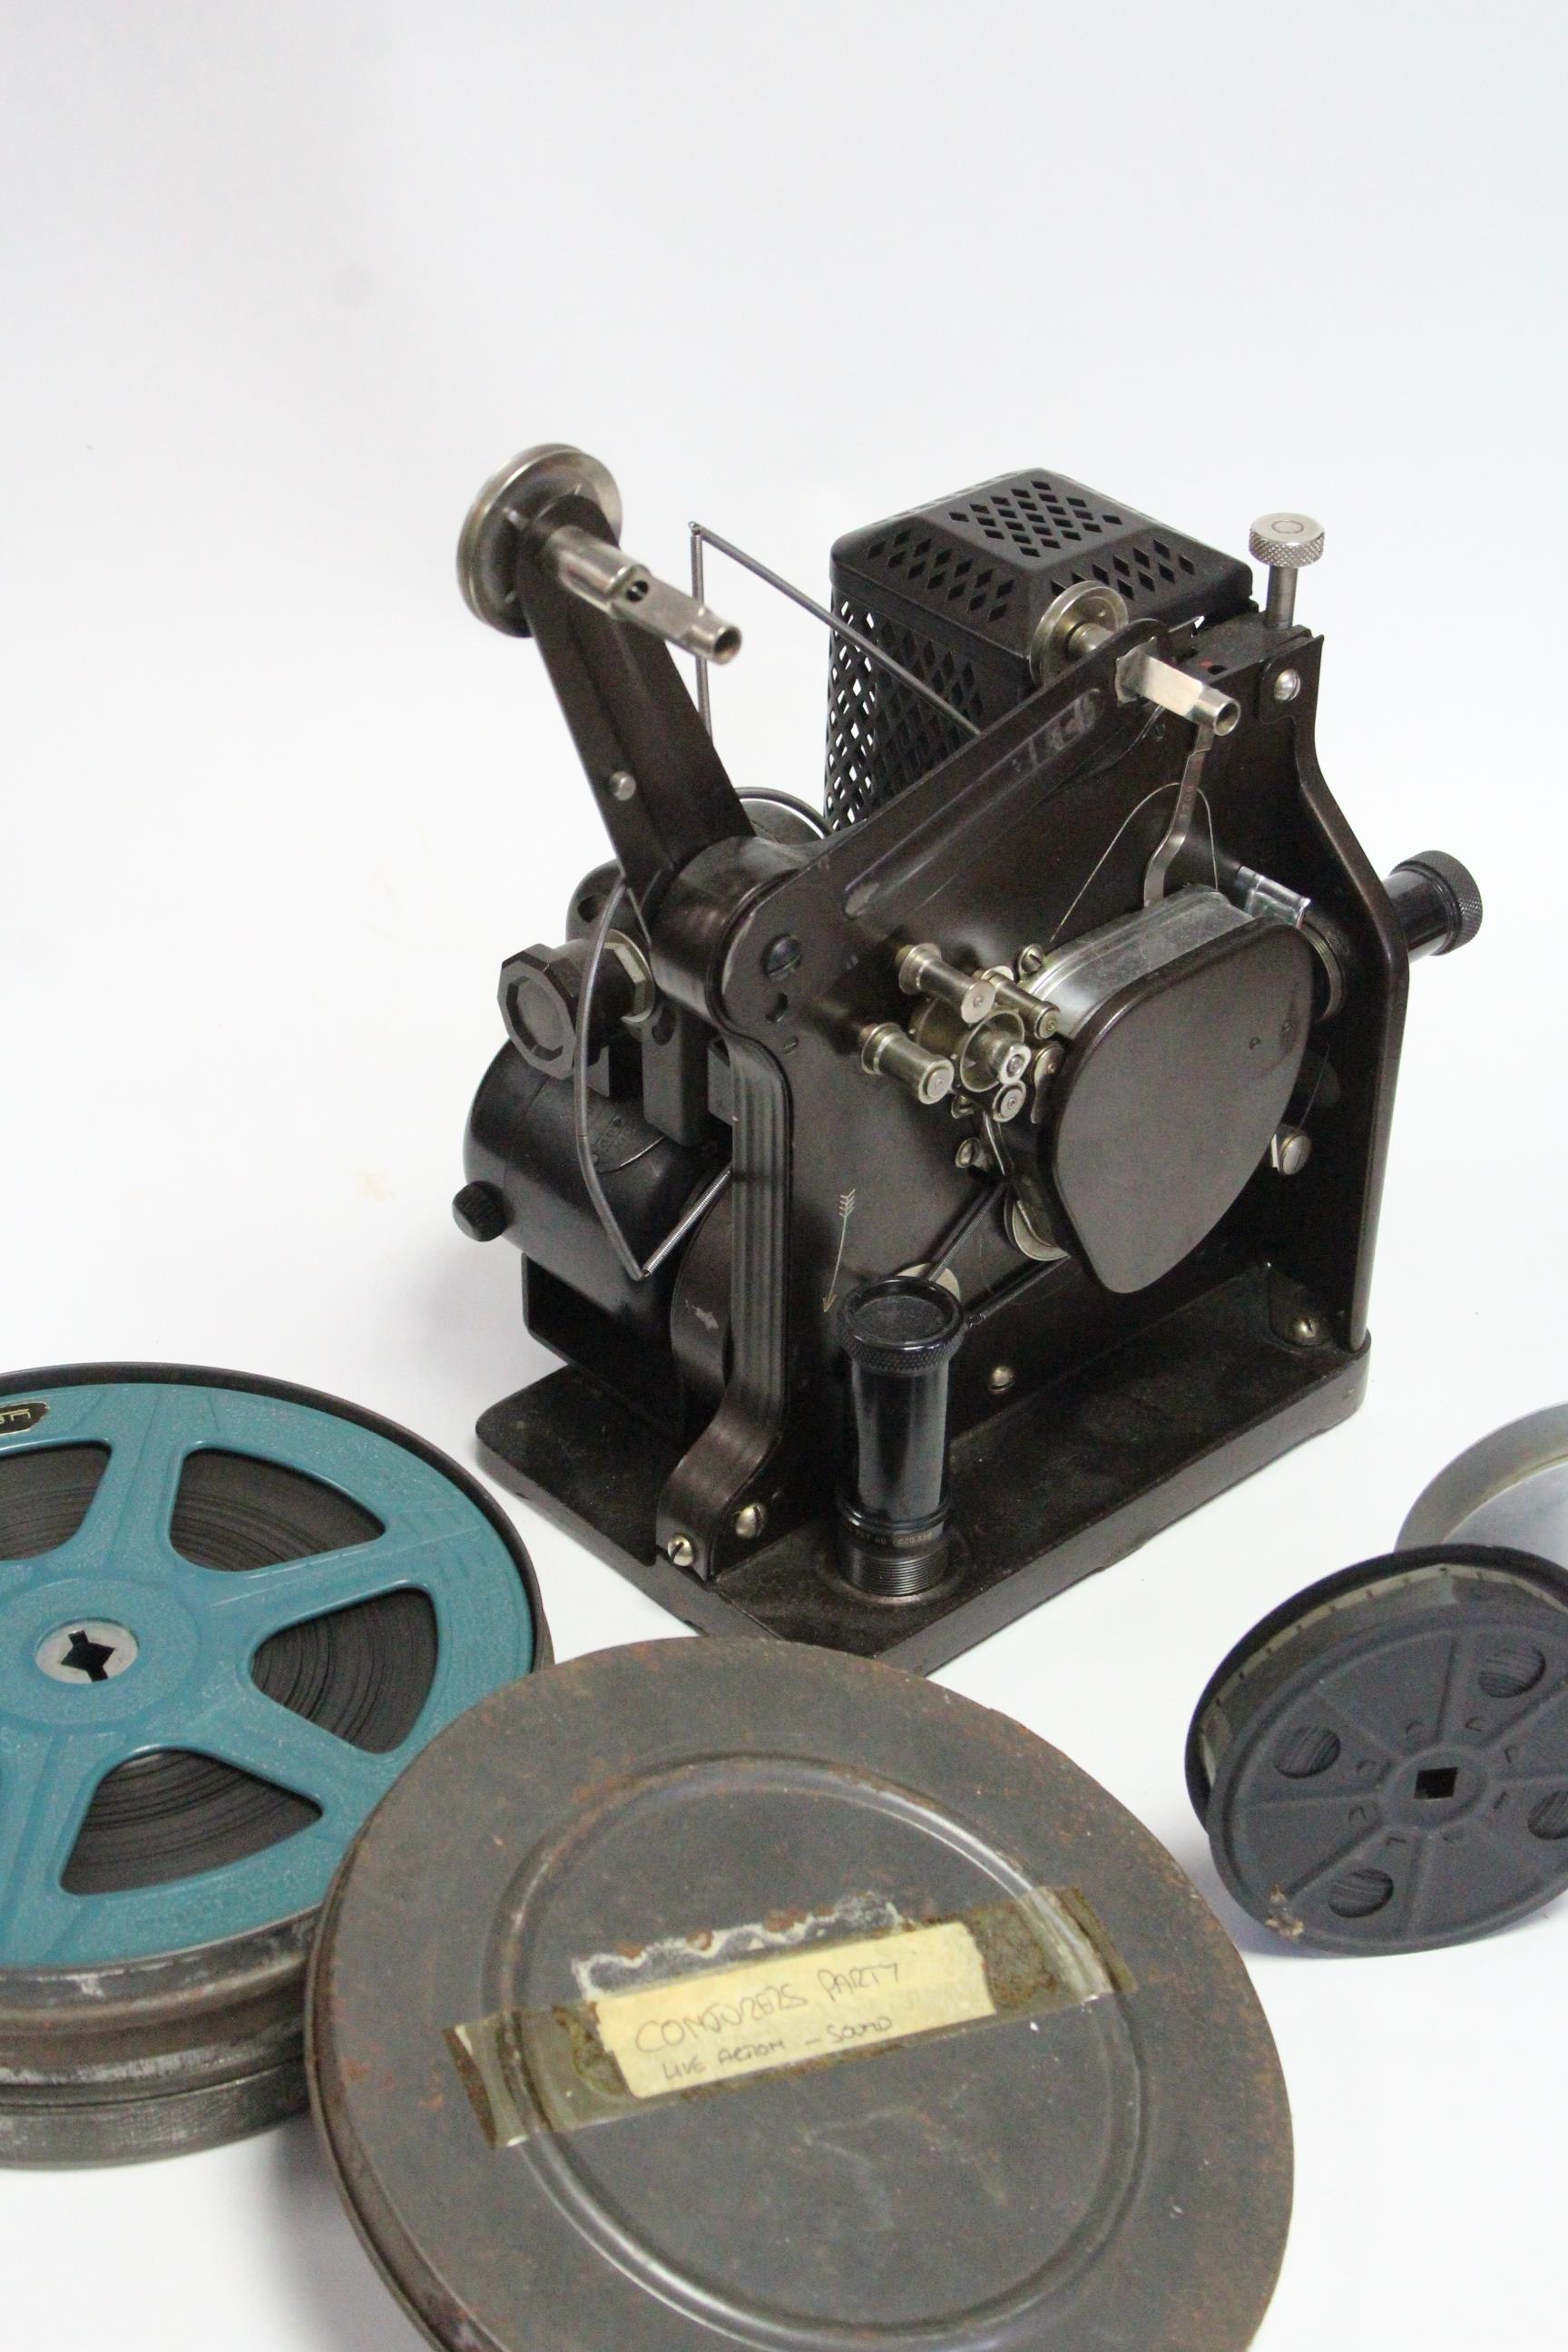 A collection of 16mm film reels; a film projector; & a film editor. - Image 2 of 11